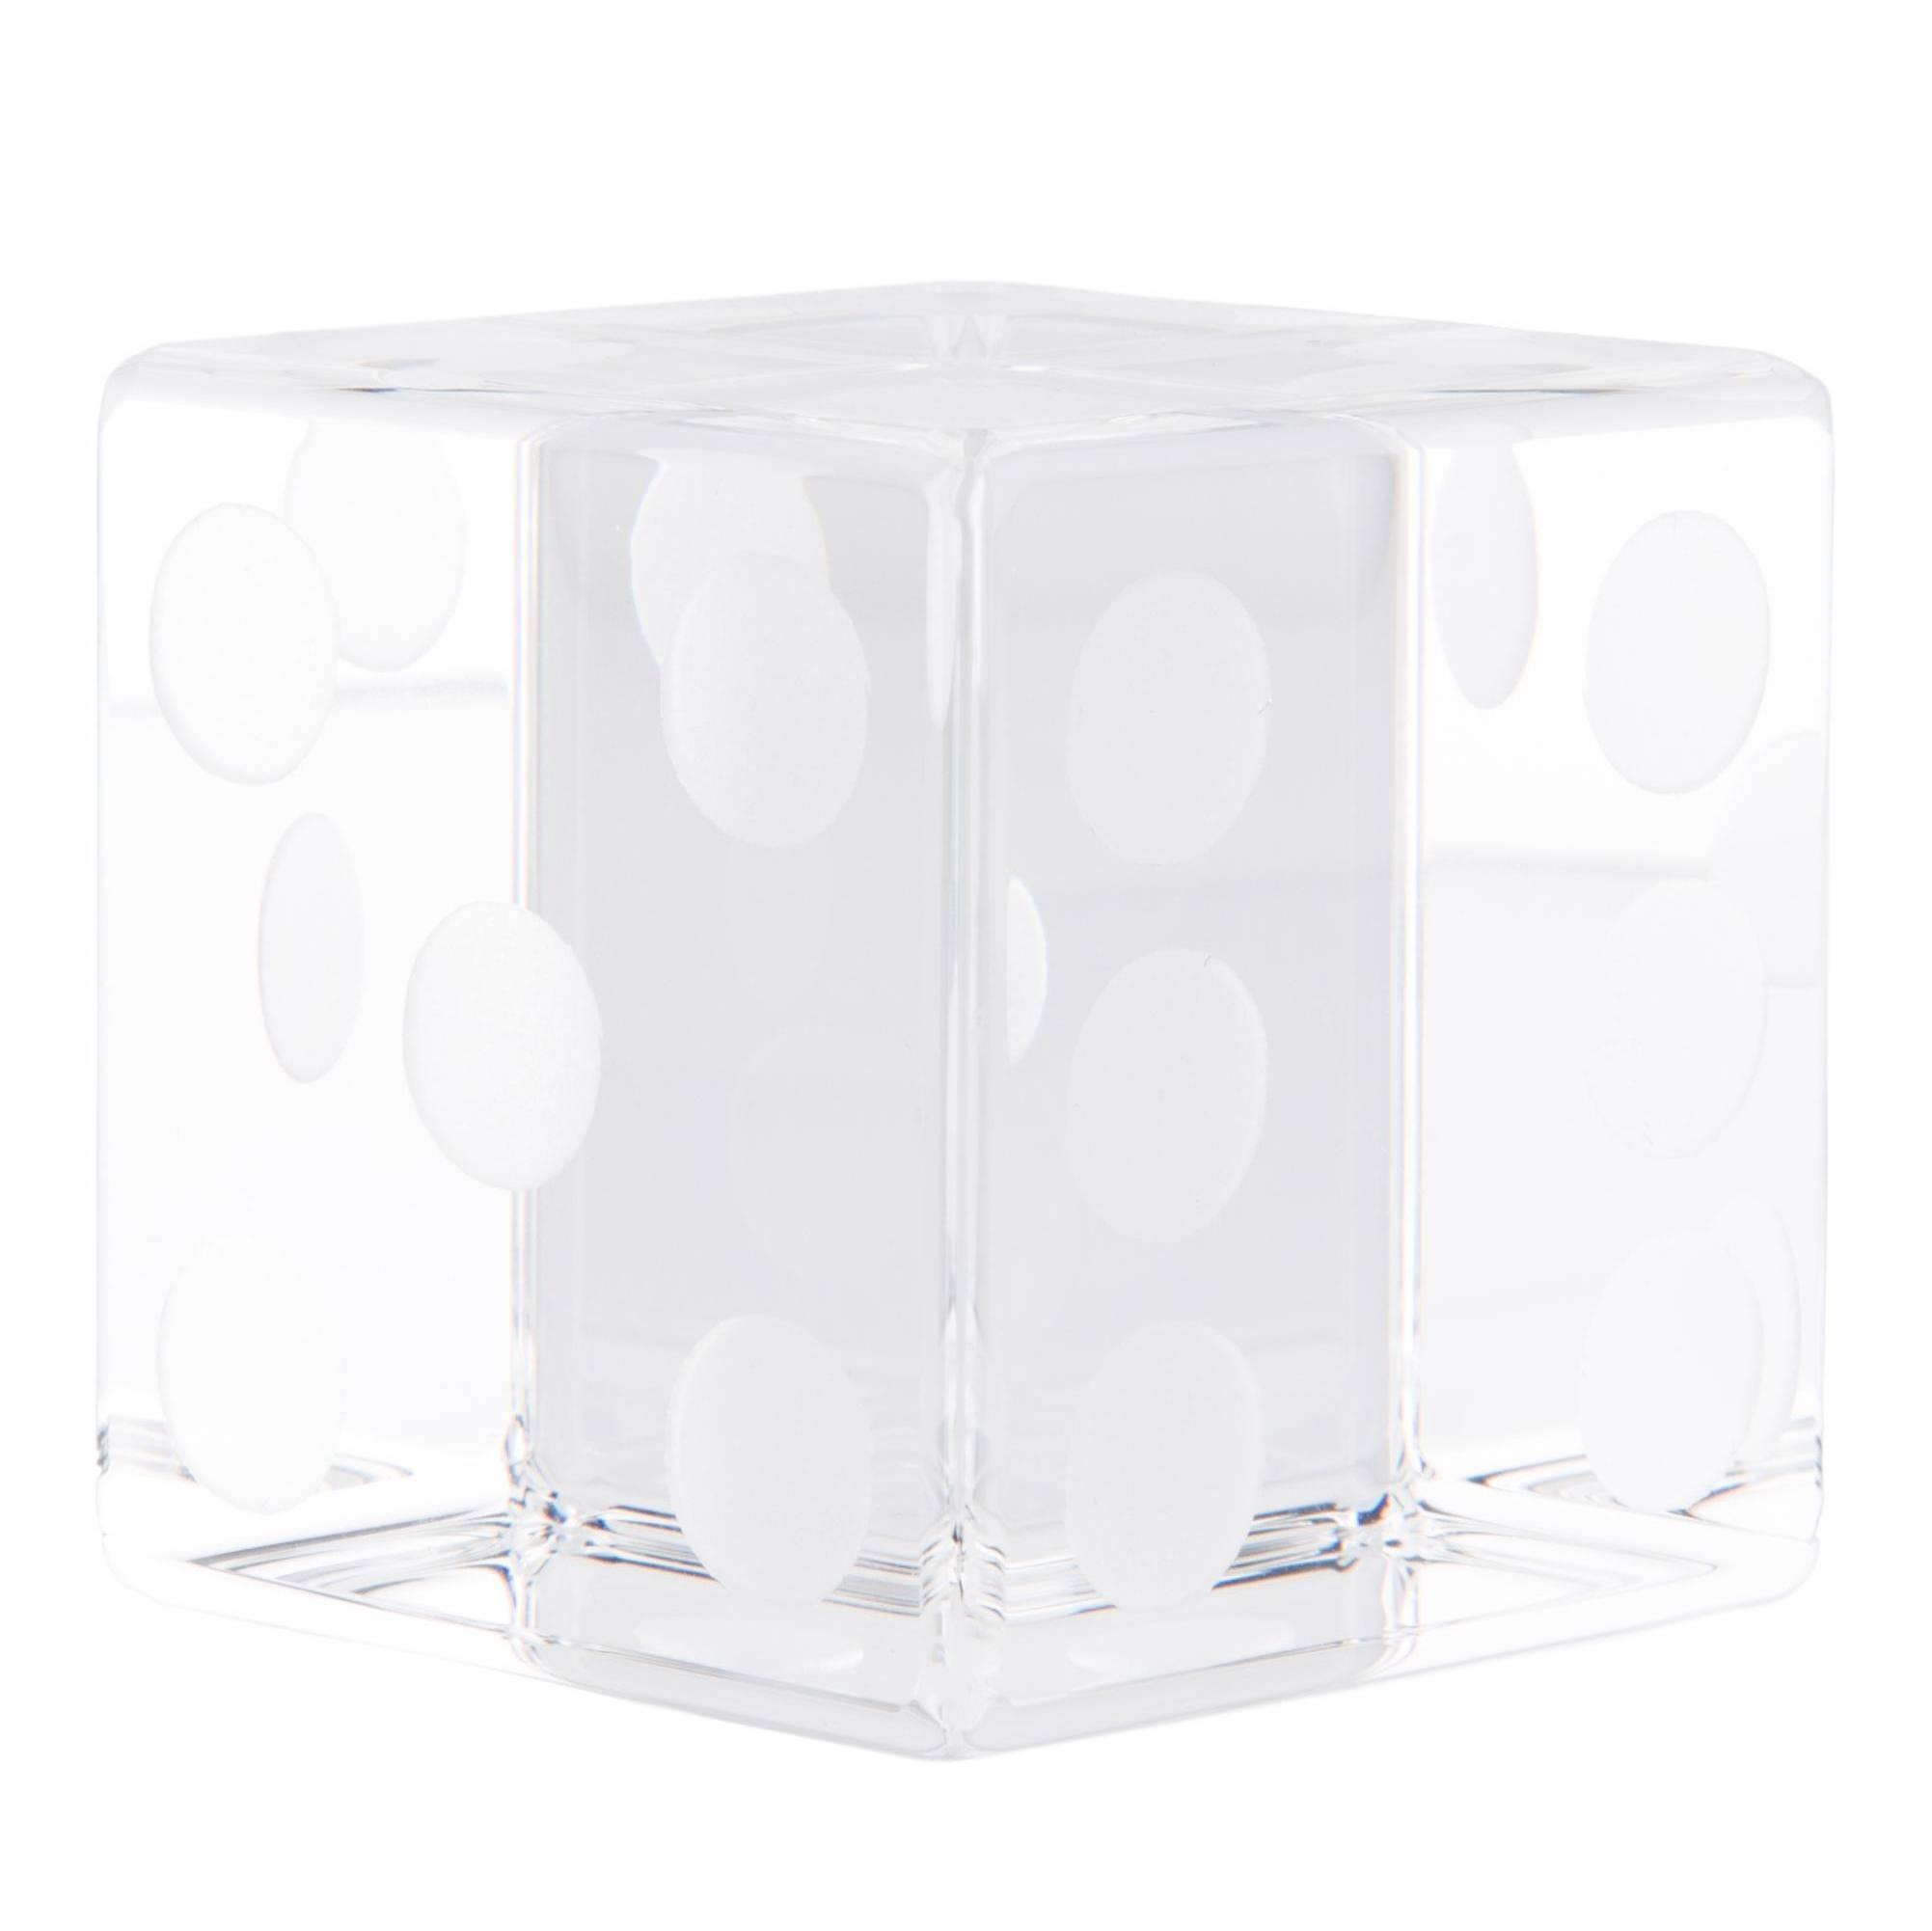 Tiffany & Co Crystal Men's Women's Home Decorative Table Desk Cube Paper Weight